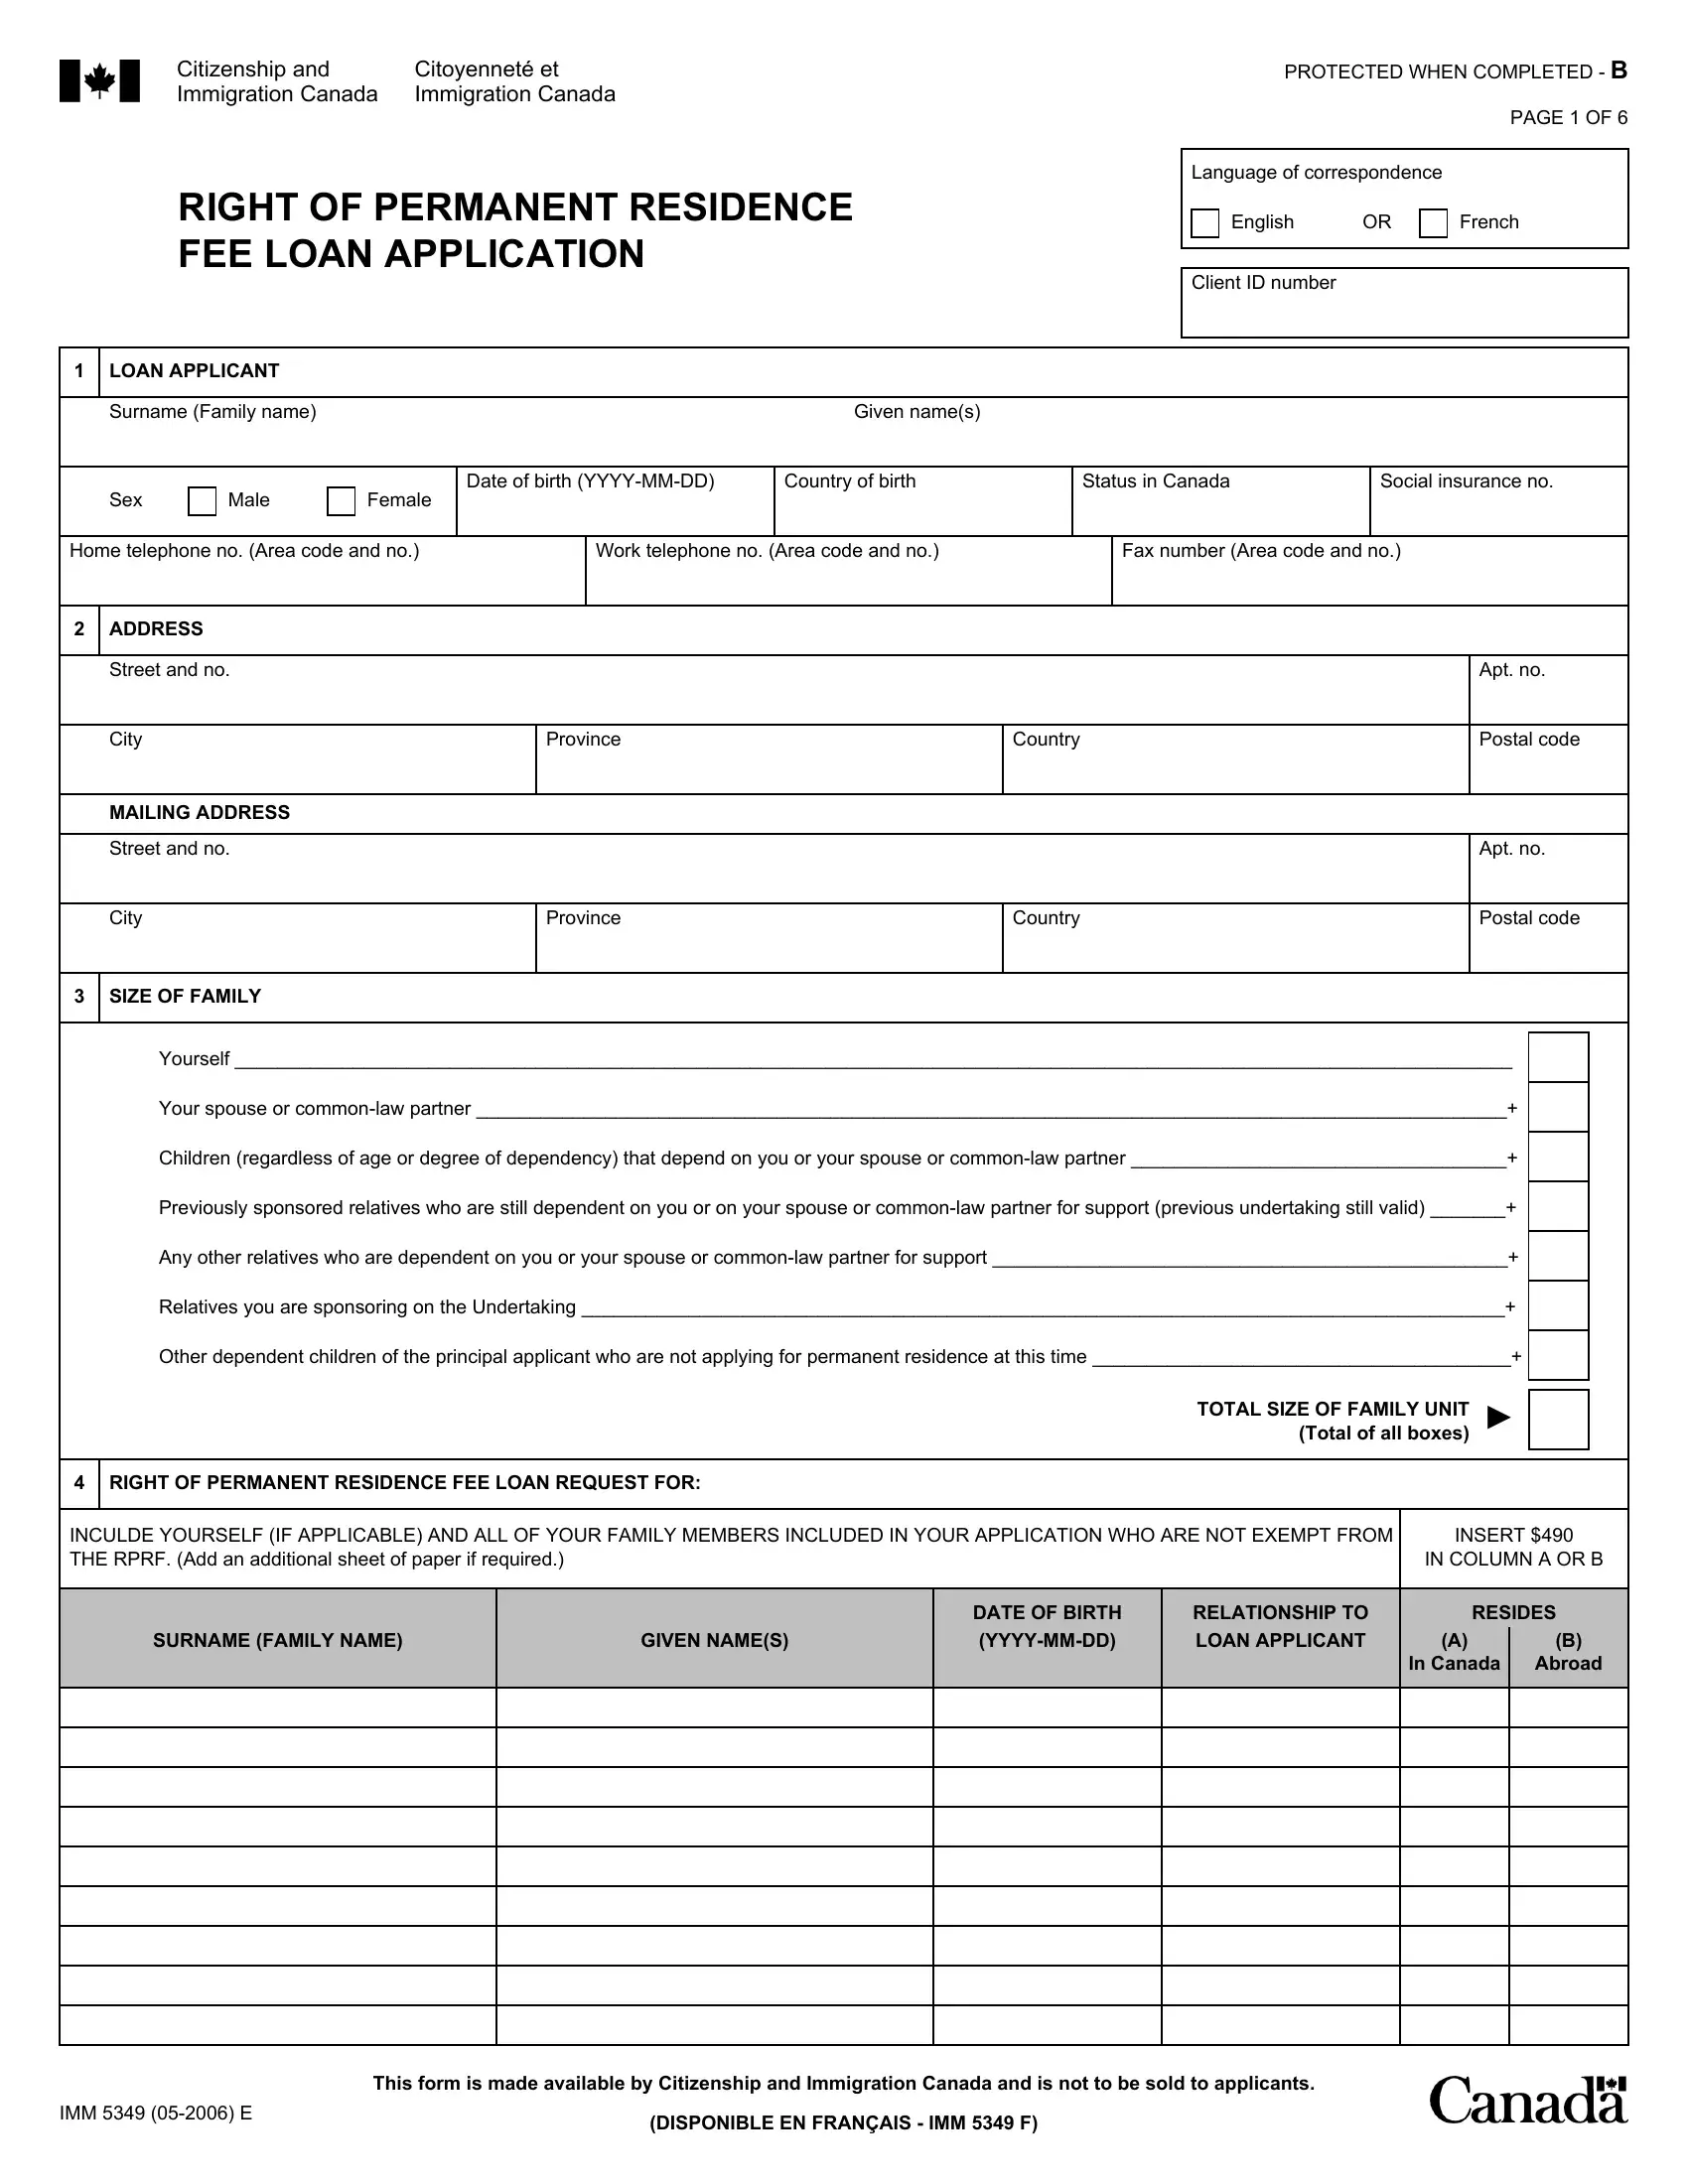 Canada Form Imm 5349 Preview